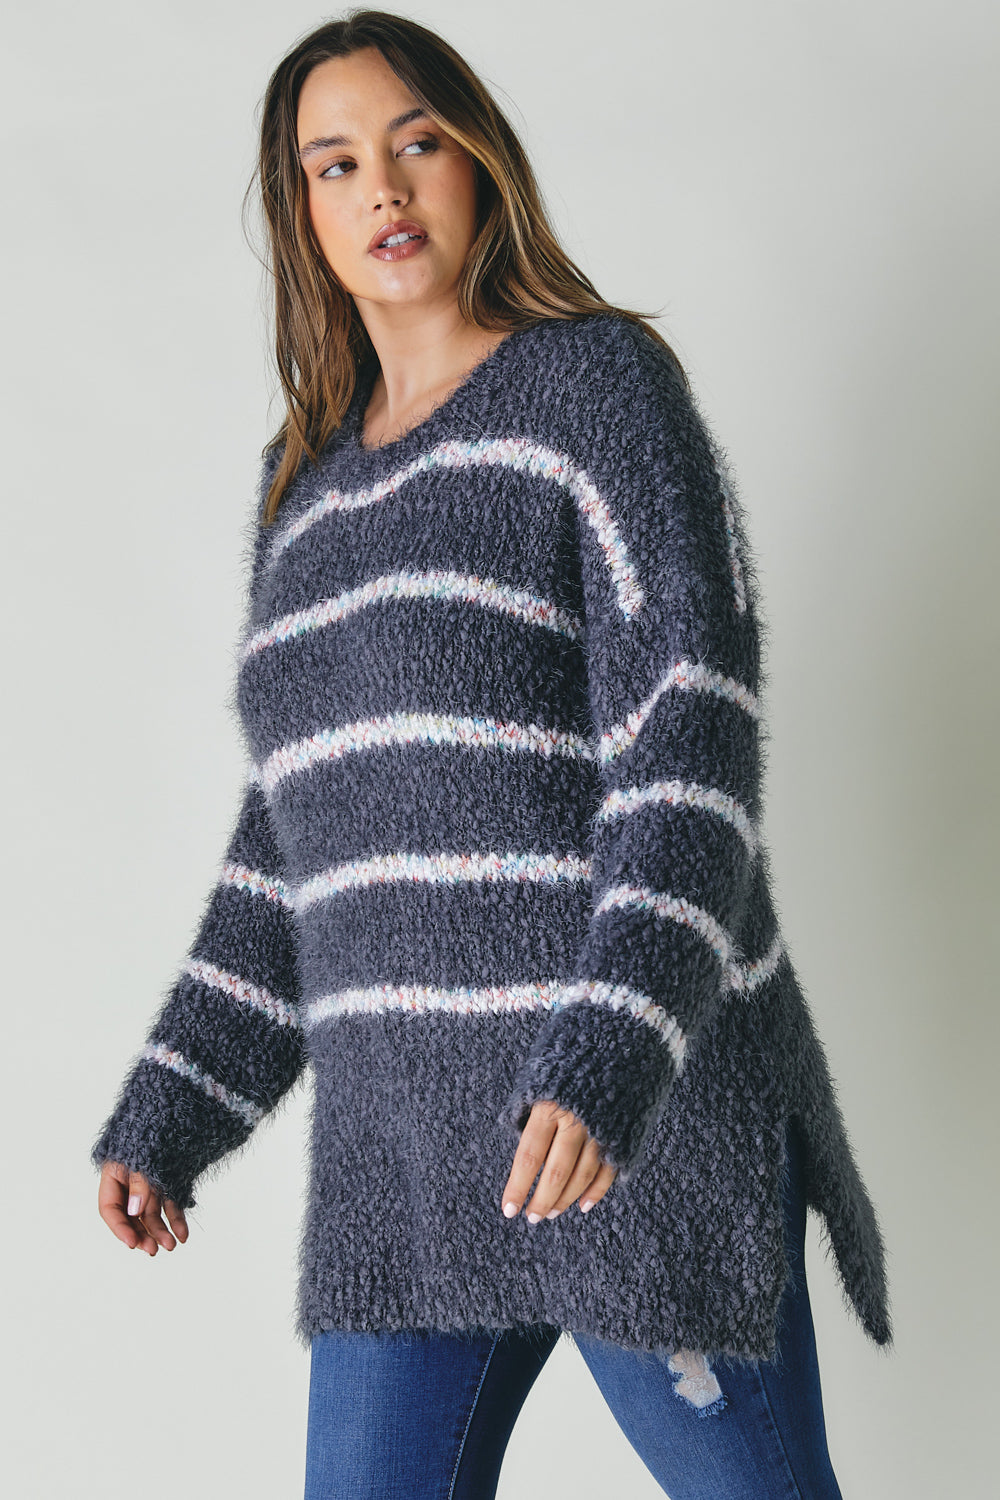 Plus Sweater With Stripe Detail Plus Sweater With Stripe Detail - M&R CORNER M&R CORNER